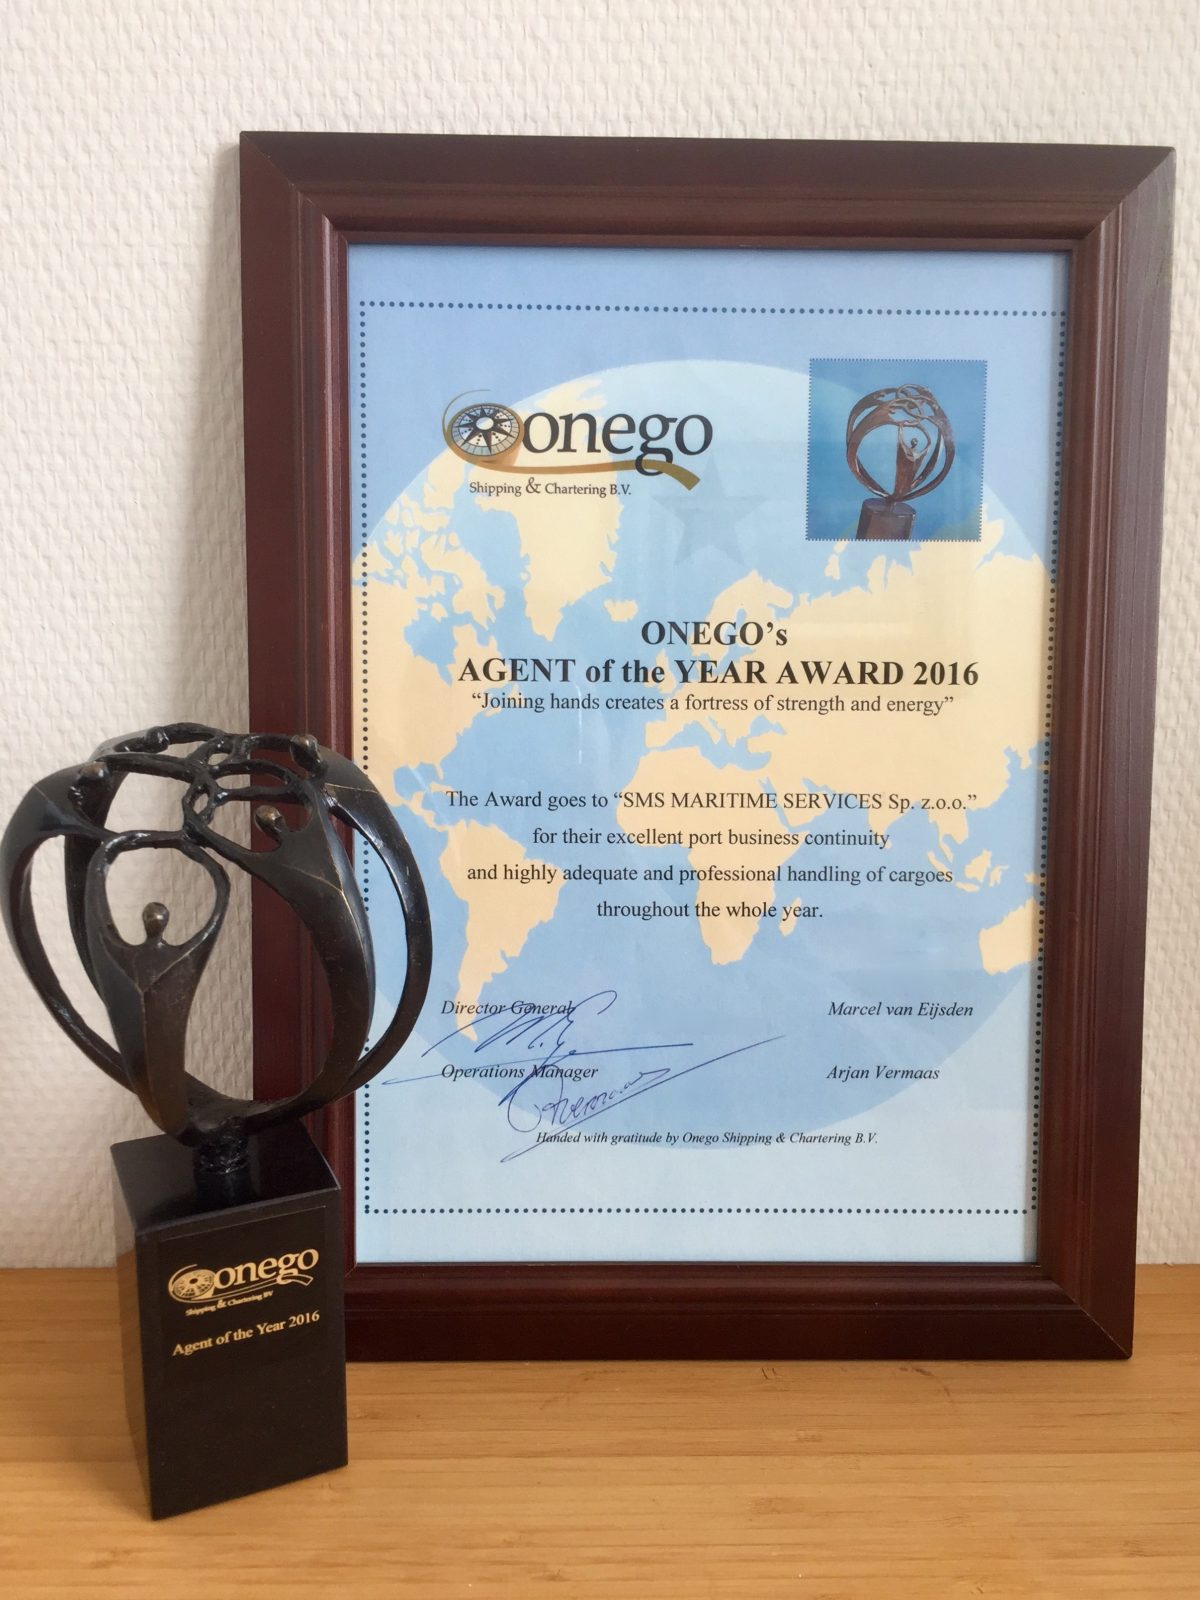 Onego’s “Agent of the Year” Award